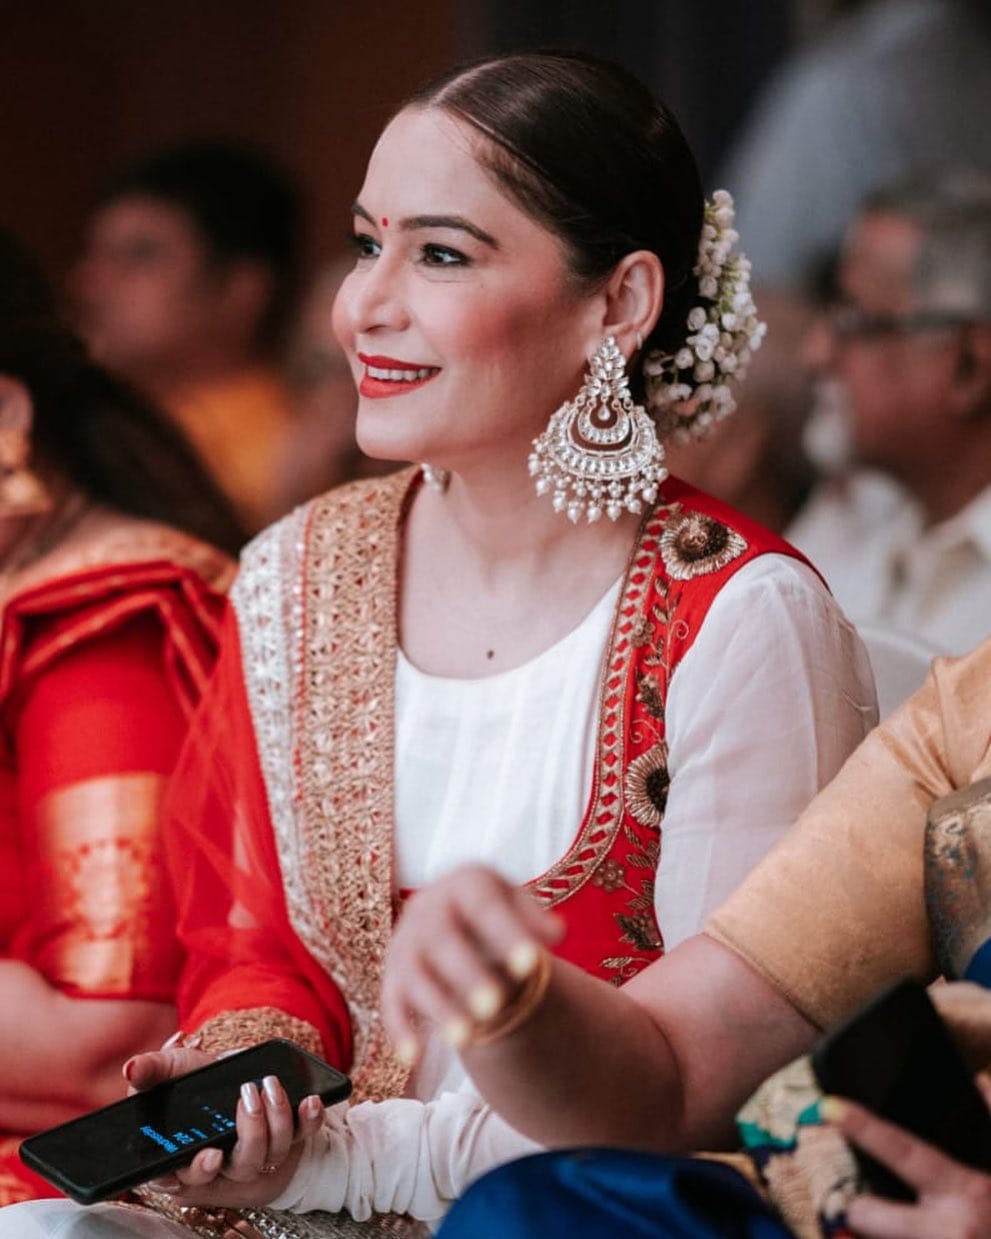 Kumkum Bhagya Fame Actress Mridula Oberoi Takes Break From Shoot To Attend Her Family Wedding. She Said She Was Mesmerizing To Meet Her Extended Family After Many Years